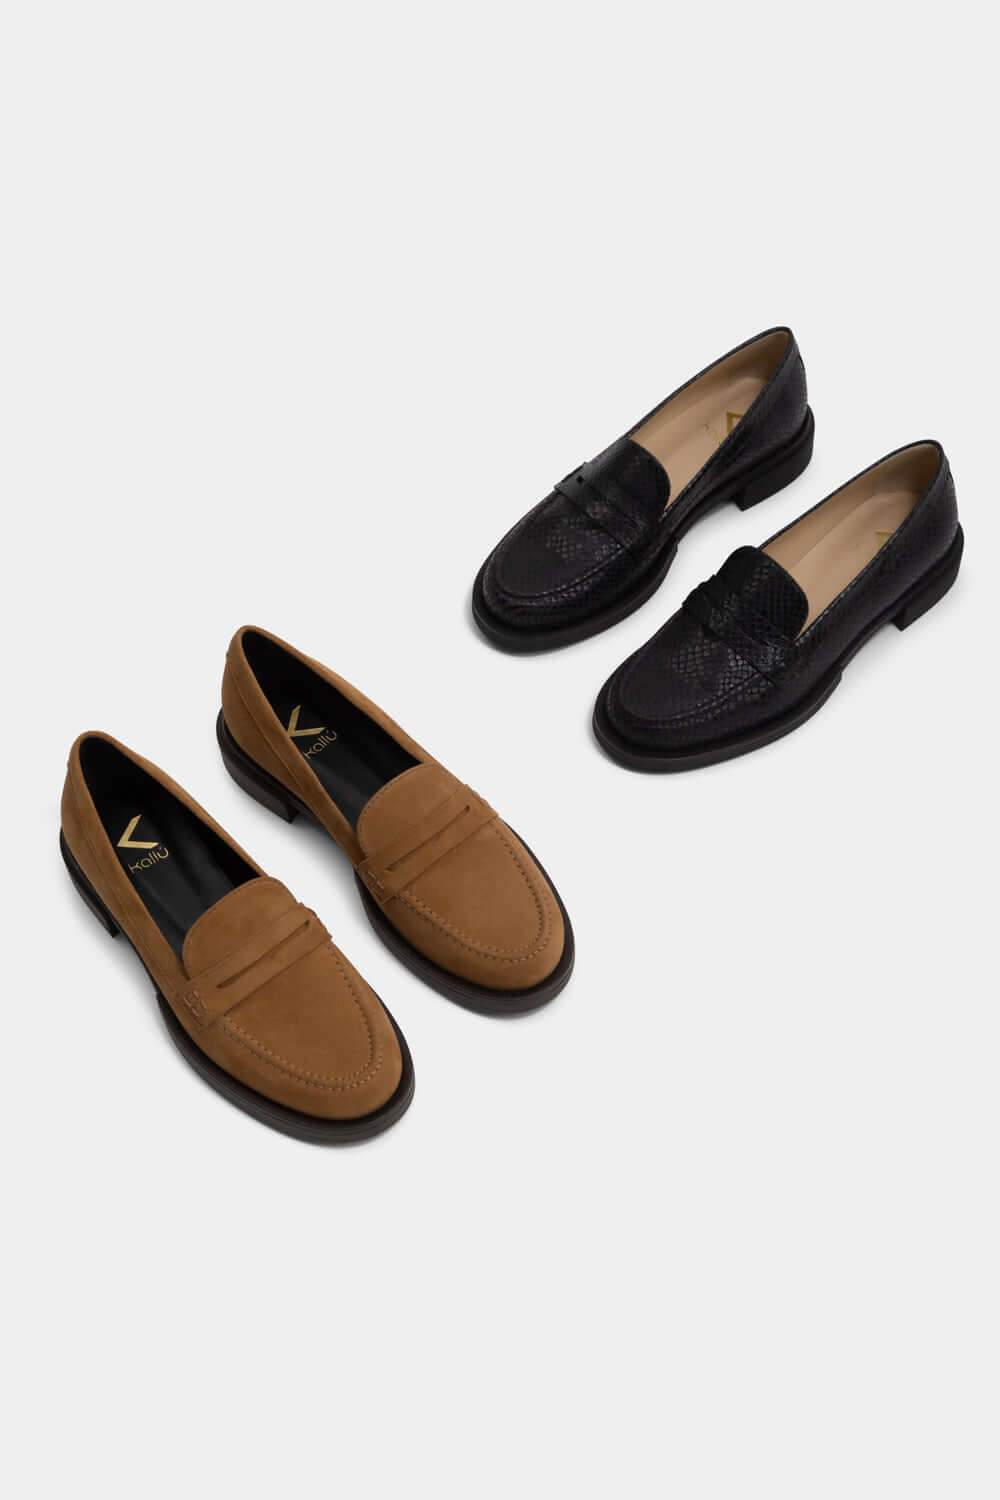 kallu-kallú-black-brown-mustard-leather-loafers-for-women-made-in-spain-loafers-moccasins